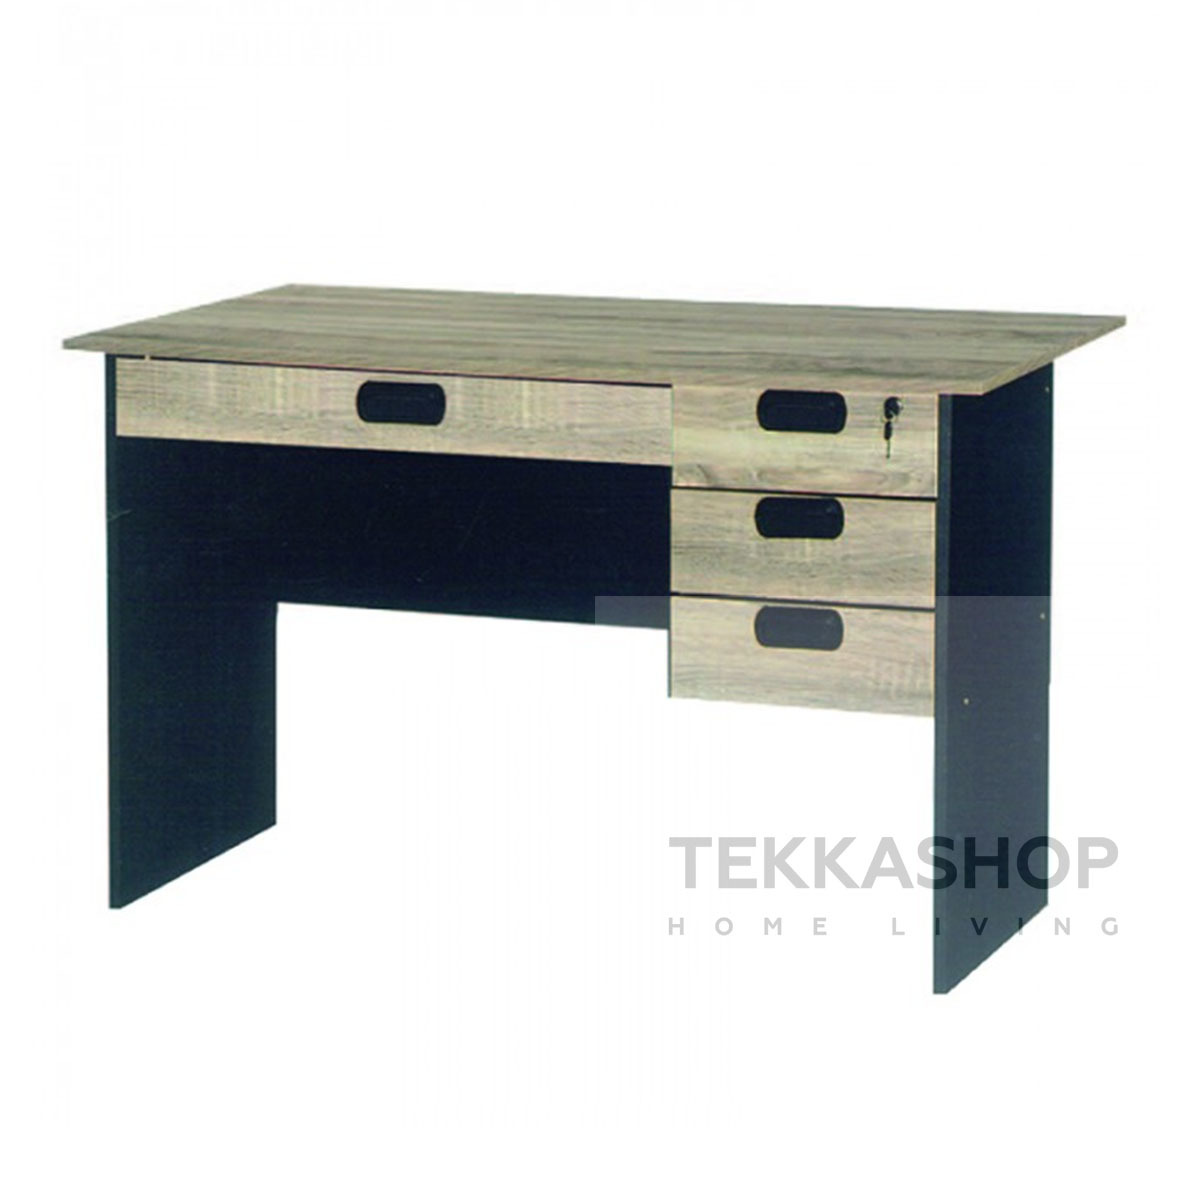 Tekkashop Gdot2800lb Mdf Home Office Study Table Writing Desk With